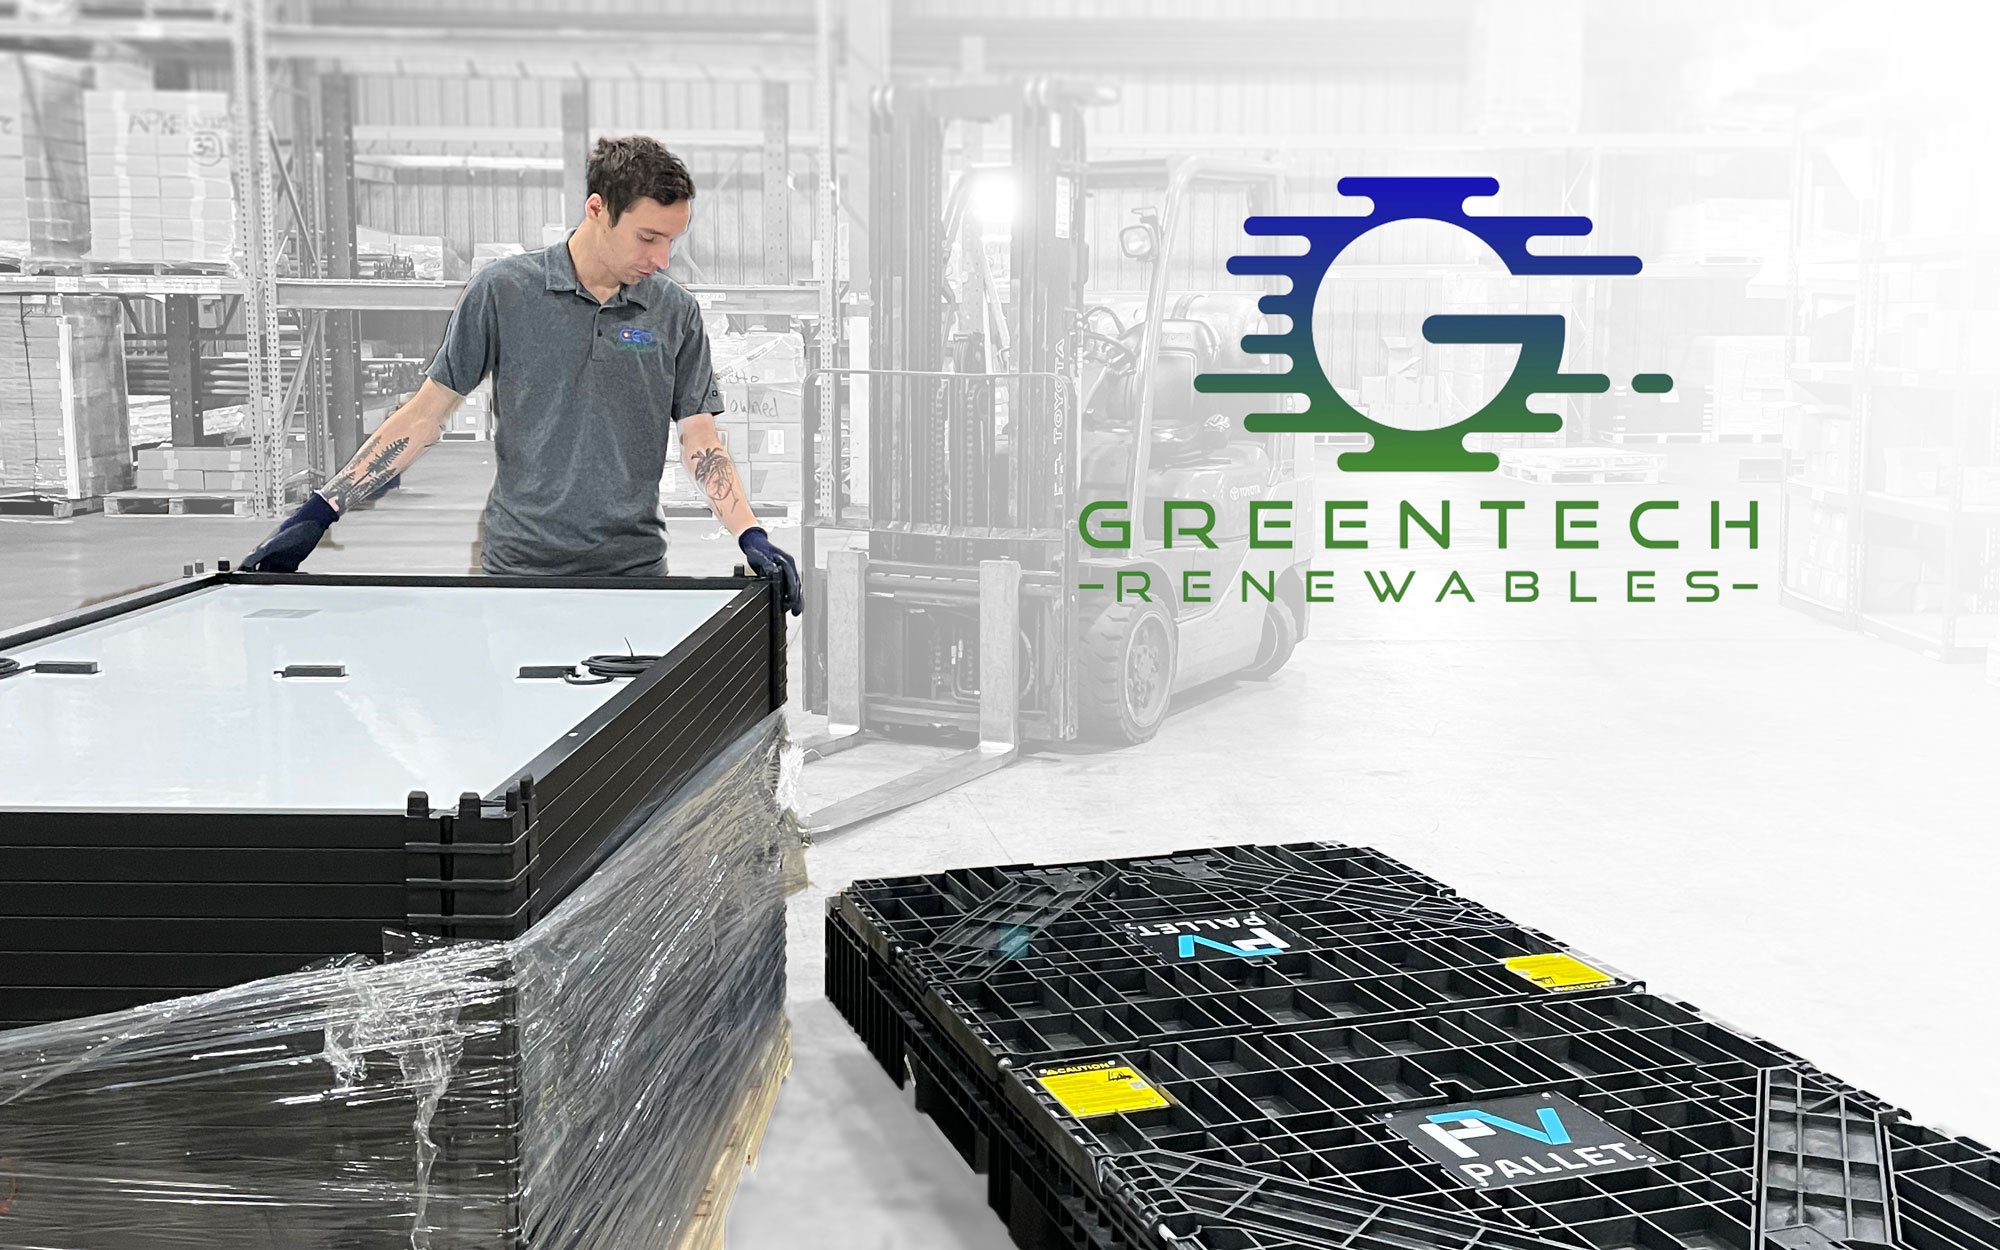 Case Study: How Greentech Renewables Reduced Solar Module Breakage by 100%  with PVpallet Series X  Sustainable Packaging for the Solar Industry